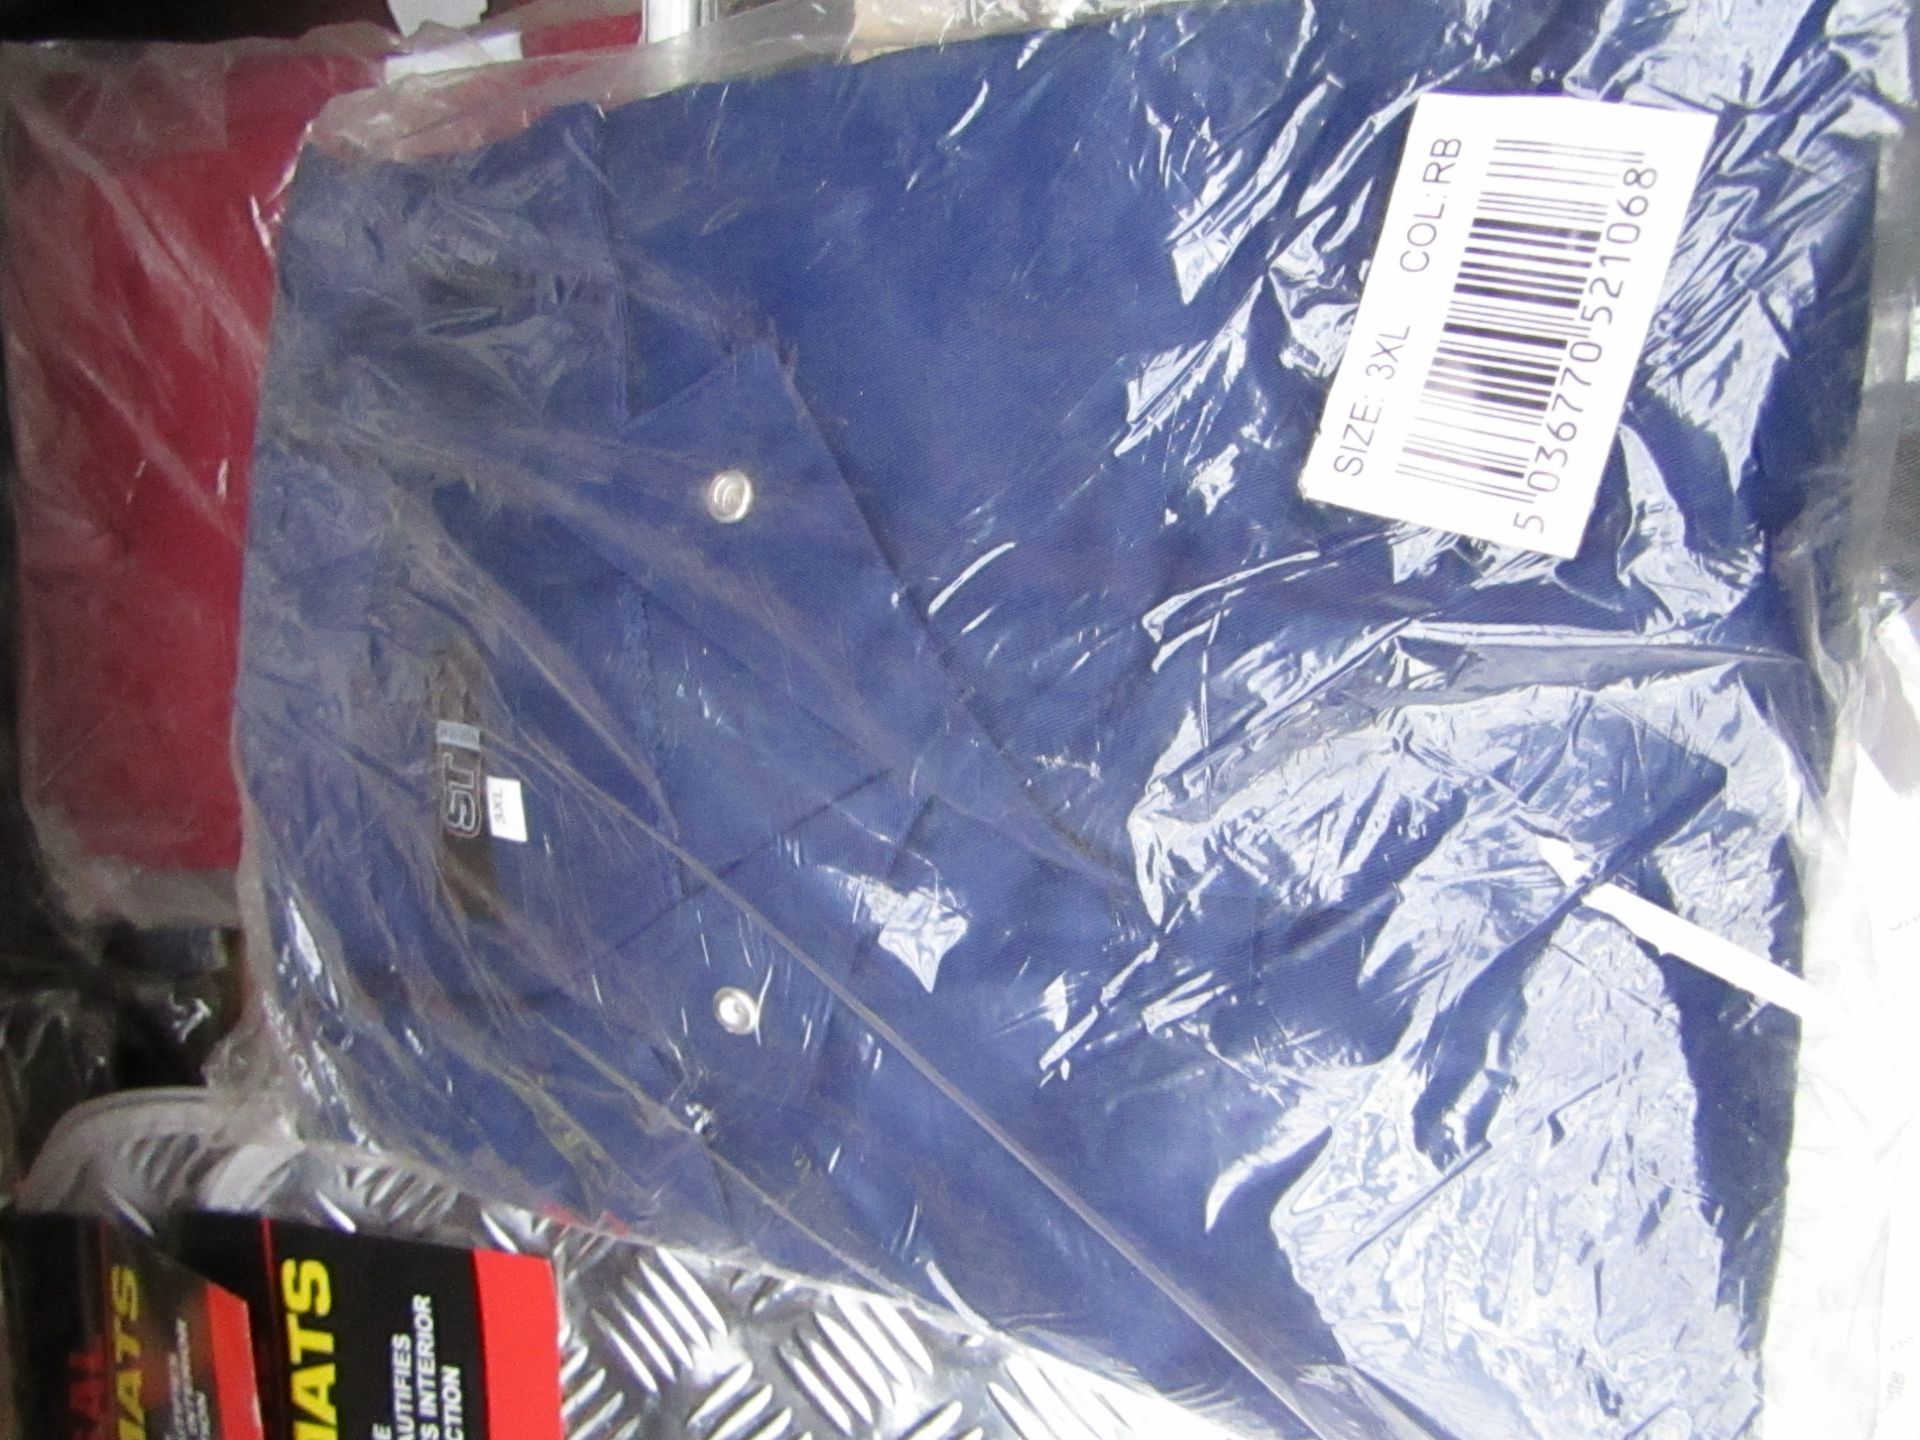 ST Workwear - Navy/Blue - Boiler Suit - Unused & Packaged - Size 3XL